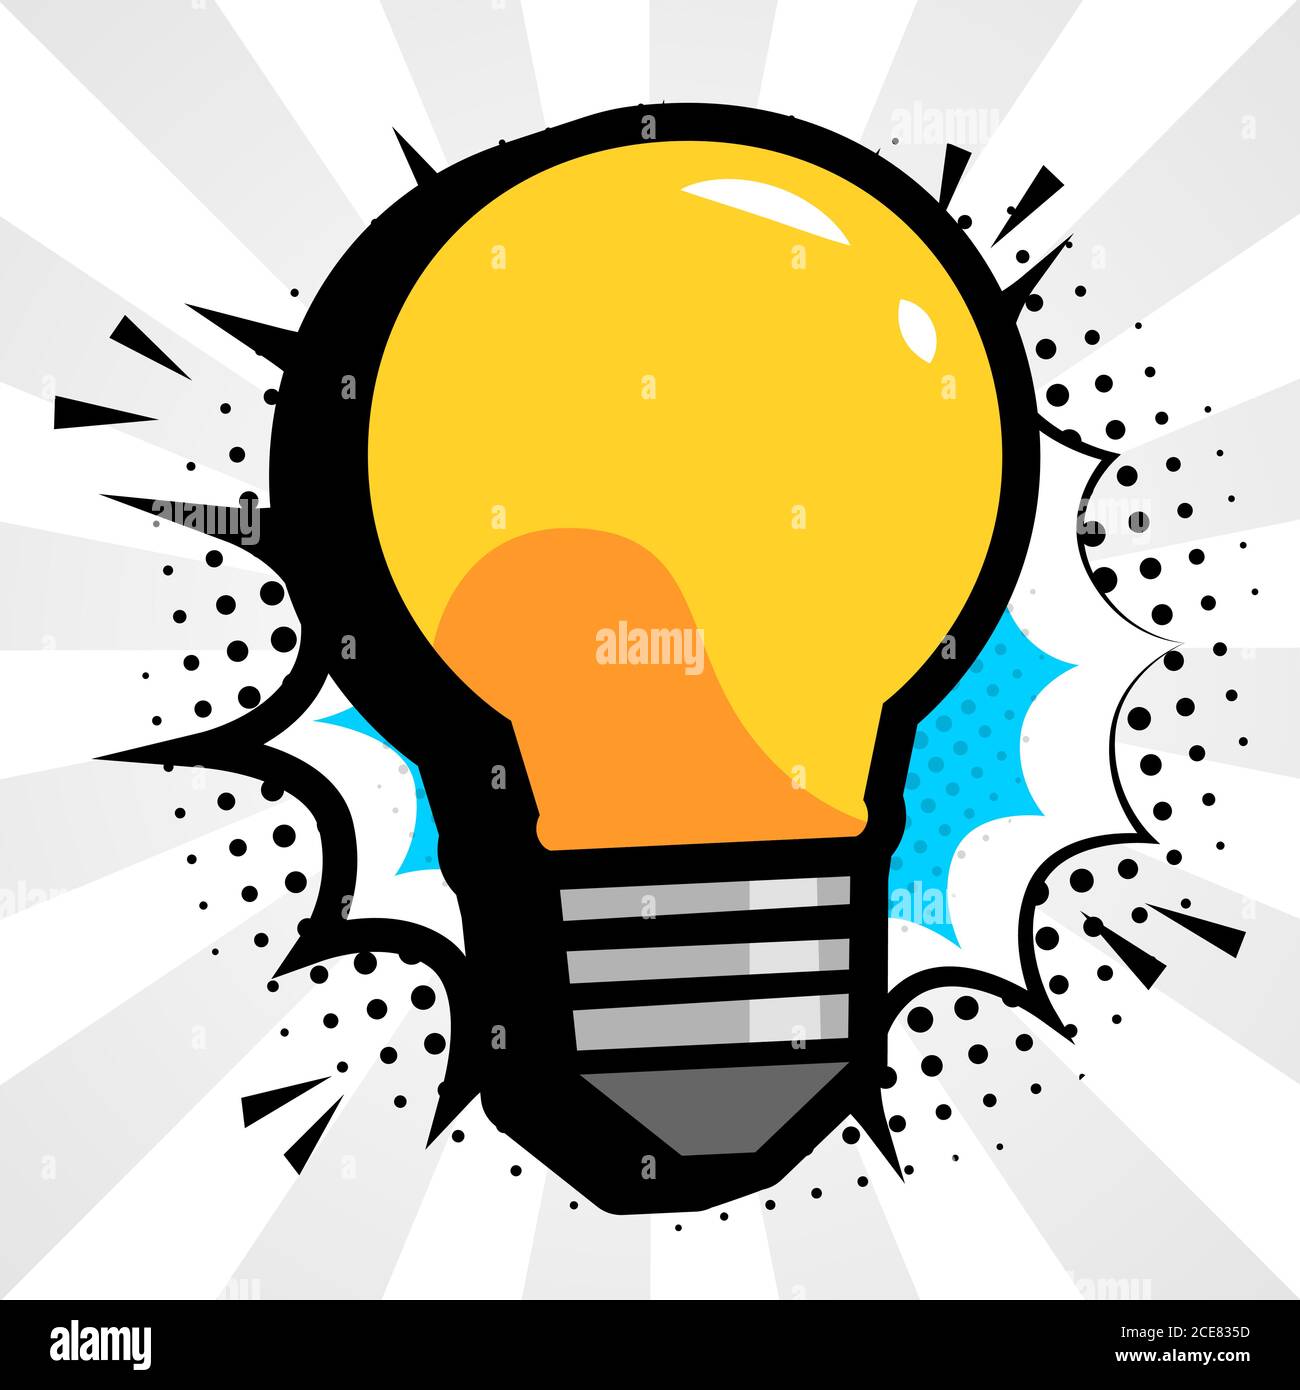 Idea or concept vector with light bulb and exclamation point in cartoon or toon style. Ideals for brilliant new ideas, brain storming, presentations o Stock Vector